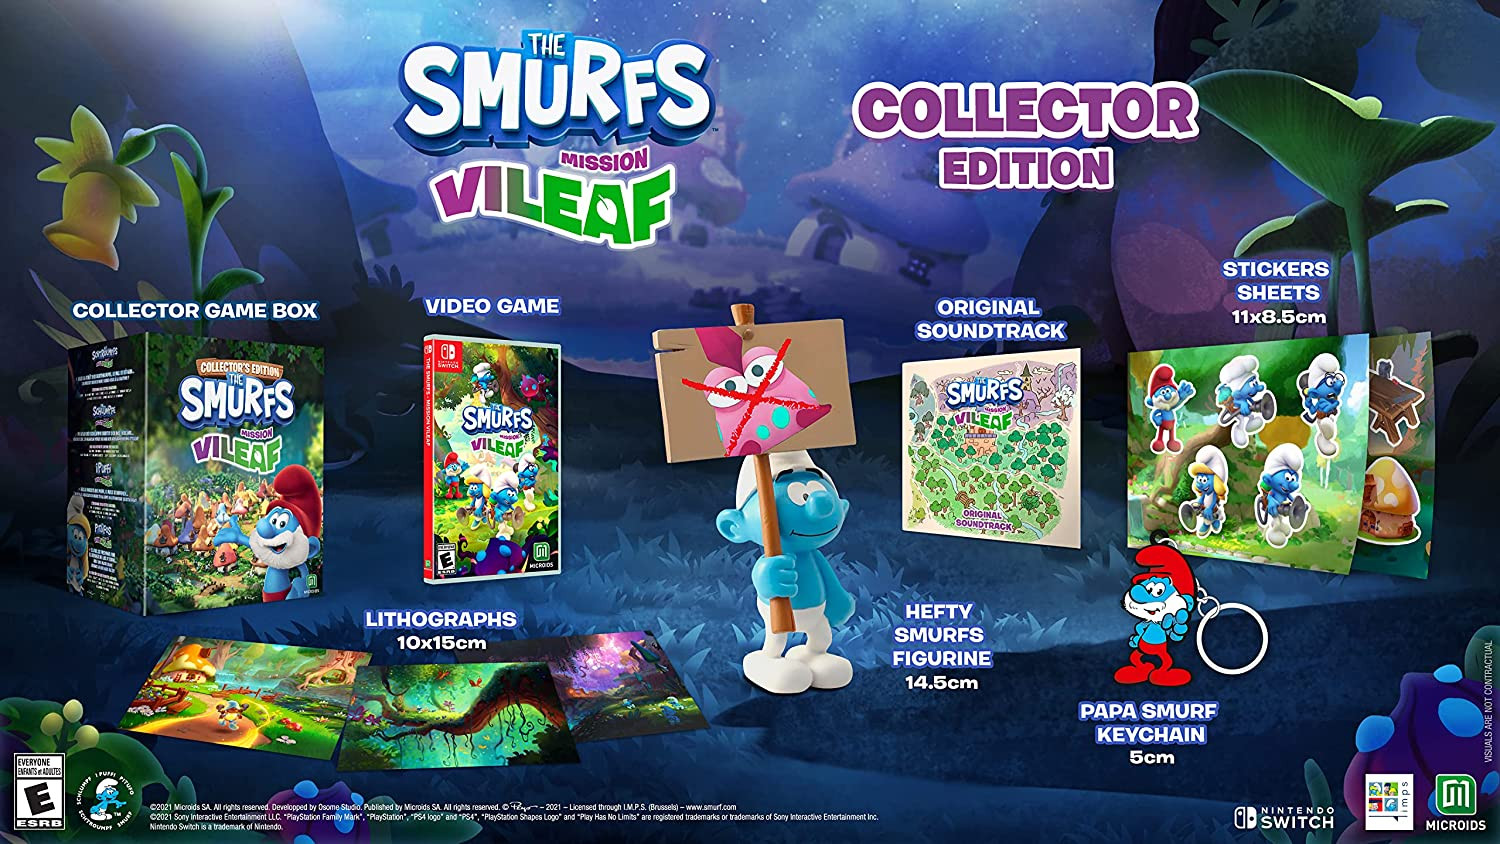 The Smurfs - Mission Vileaf Collector Edition - Nintendo Switch